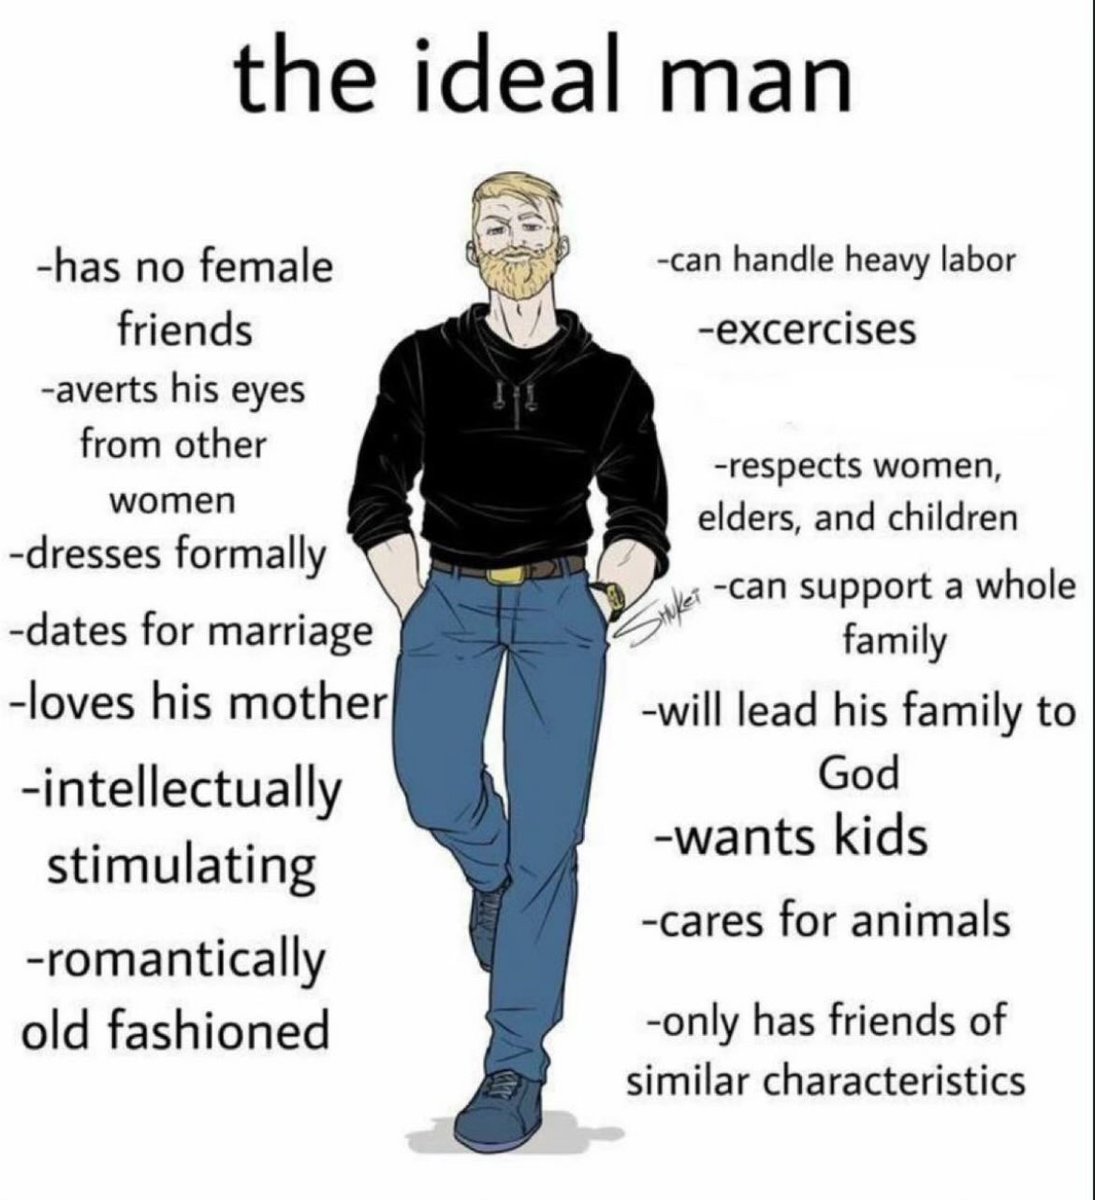 Is this the ideal man?